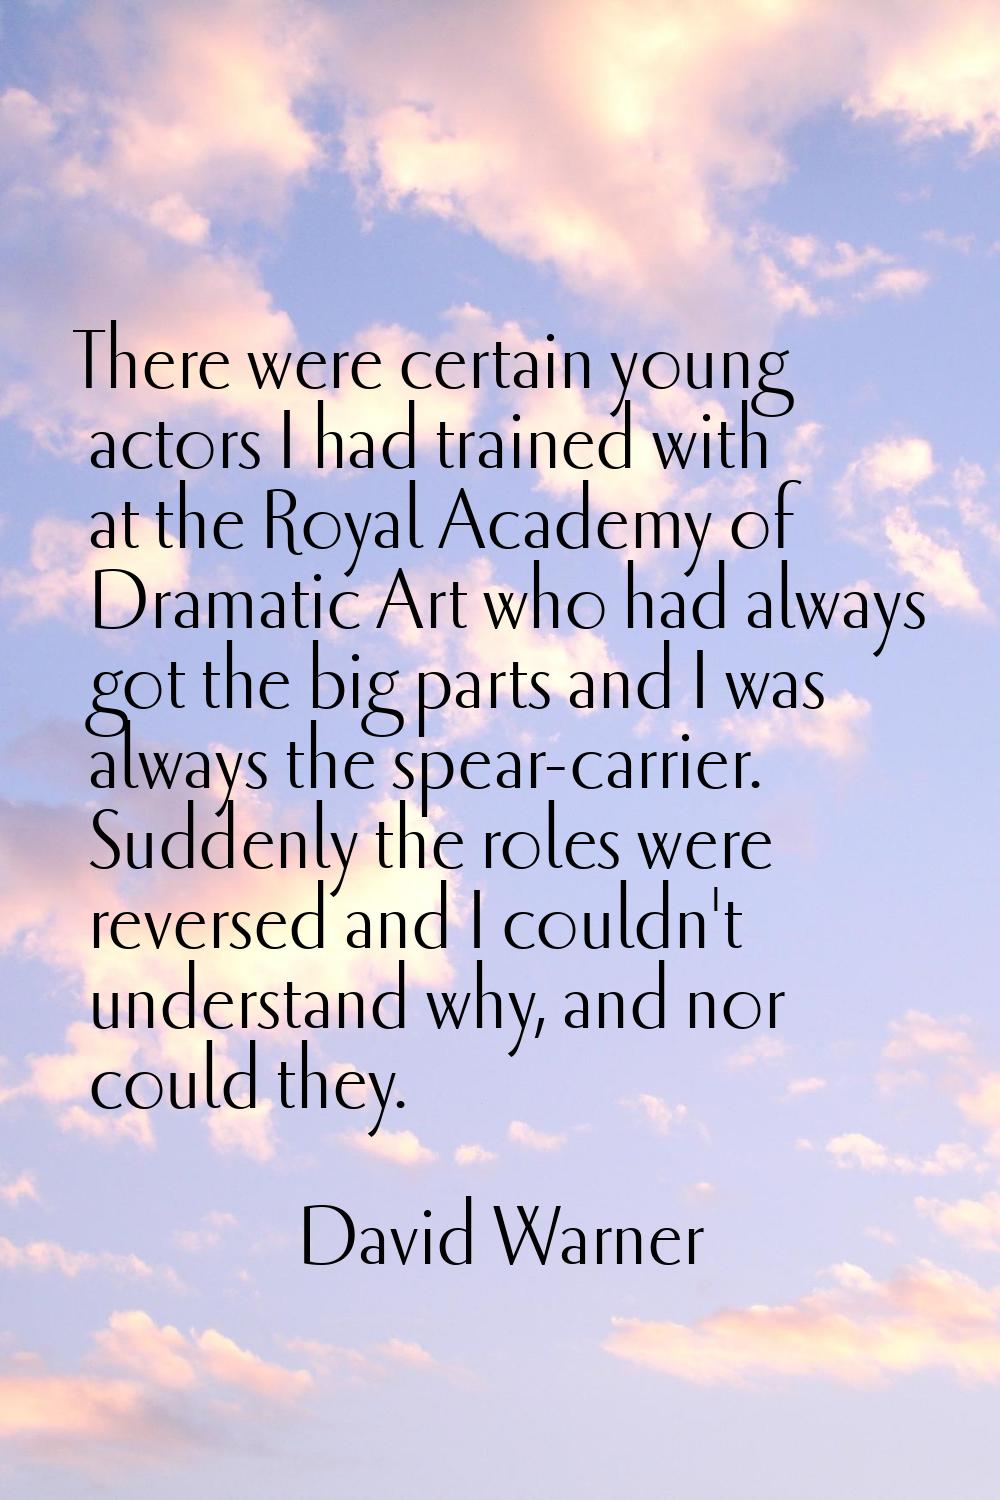 There were certain young actors I had trained with at the Royal Academy of Dramatic Art who had alw